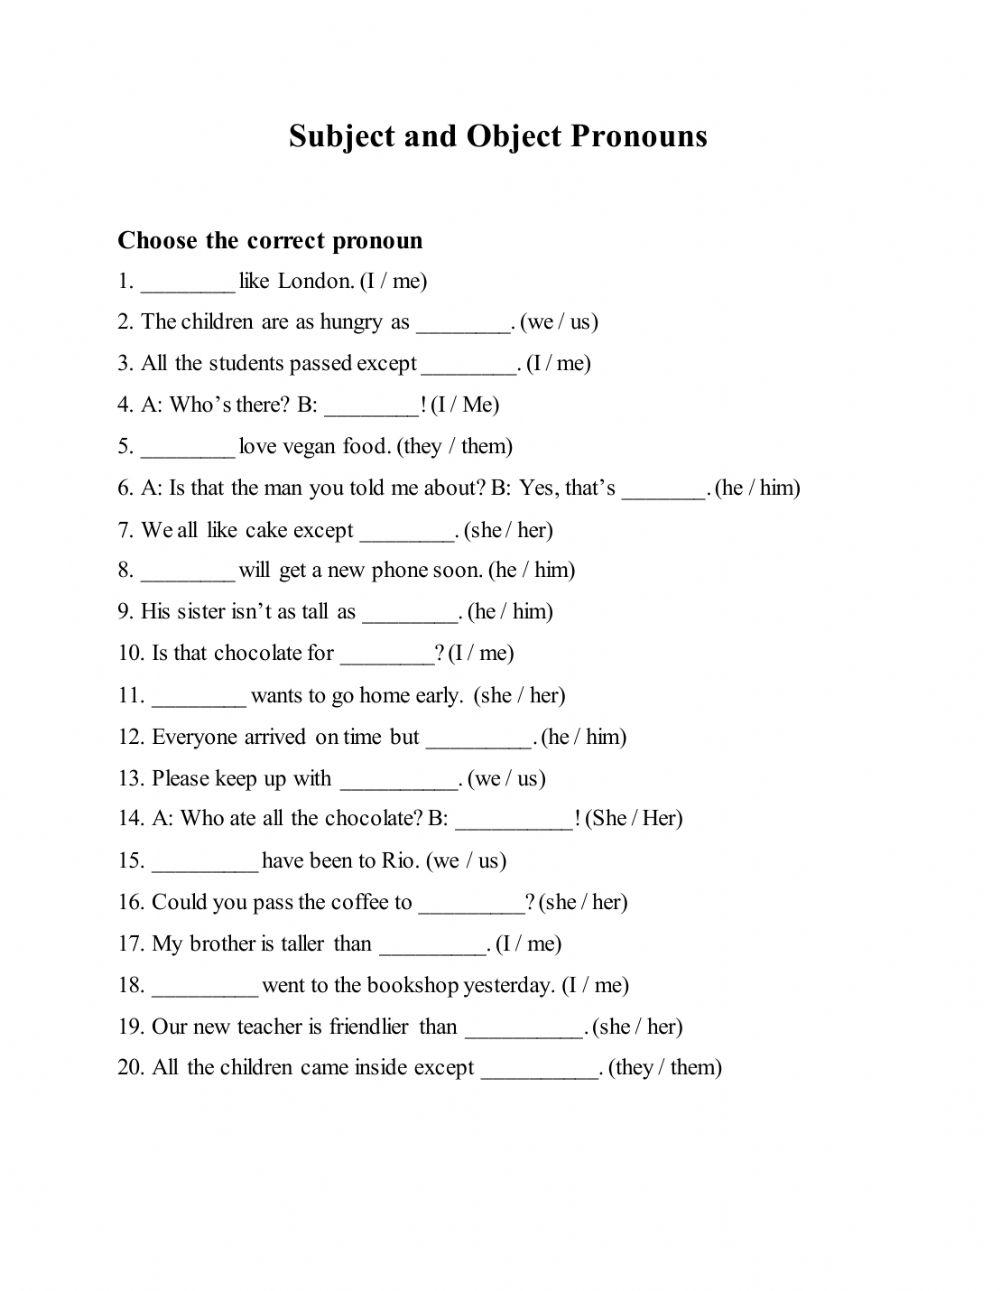 Subject and object pronouns